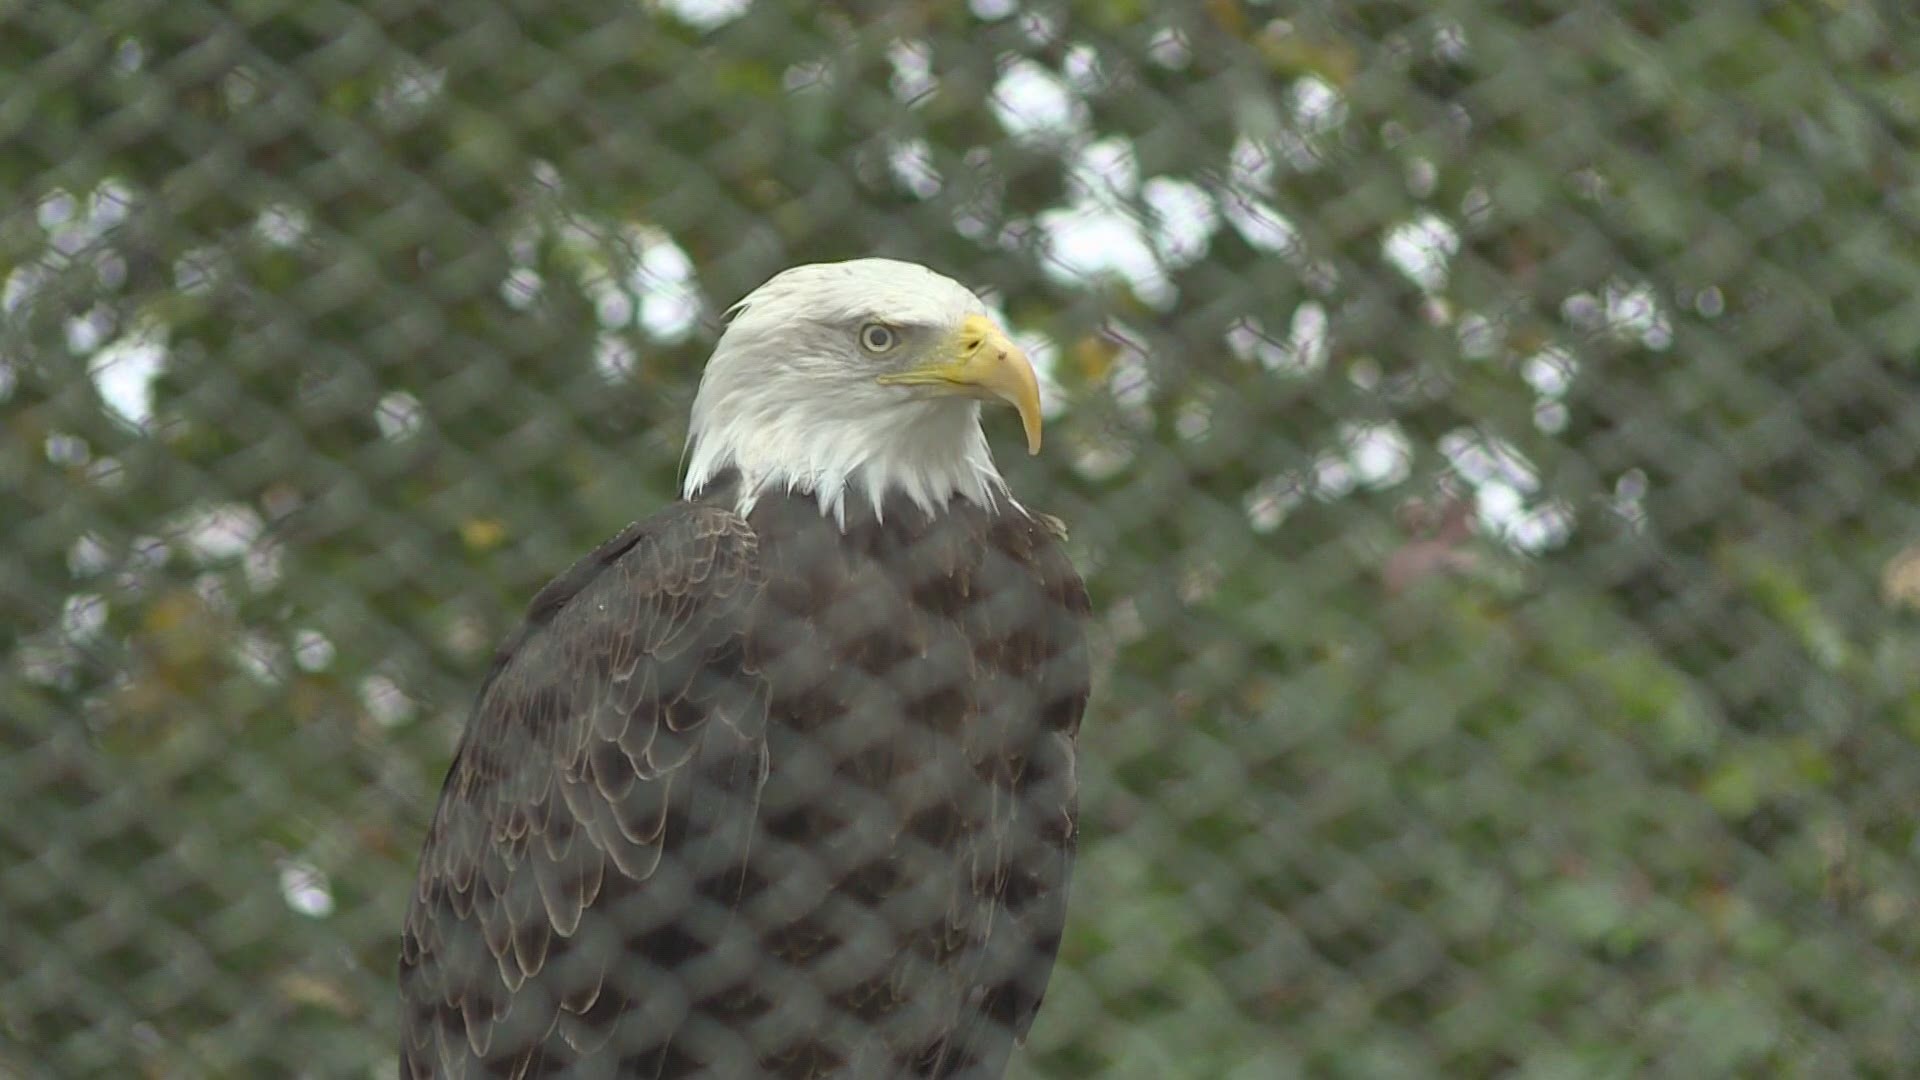 John Ball Zoo currently has two eagles, Bea and Ruth, who were both injured in the wild and rehabilitated, but could no longer survive in the wild.